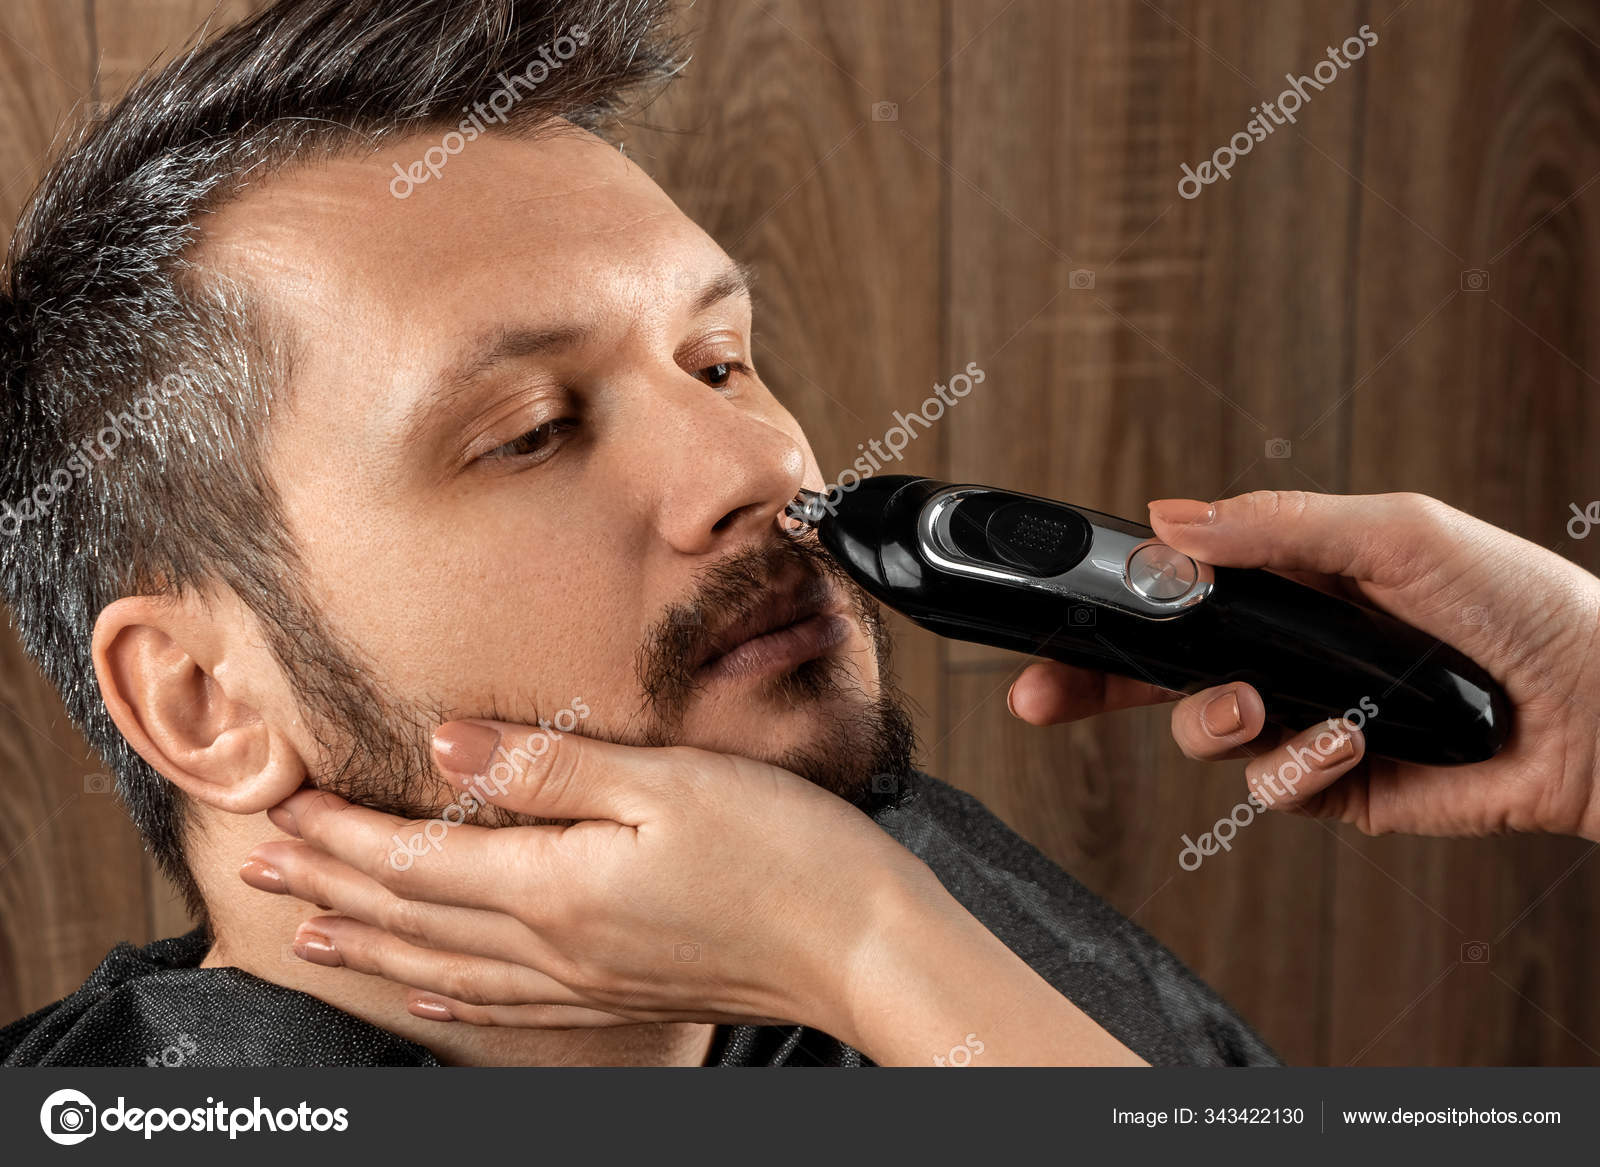 Nose hair trimmer Stock Photos, Royalty Free Nose hair trimmer Images |  Depositphotos